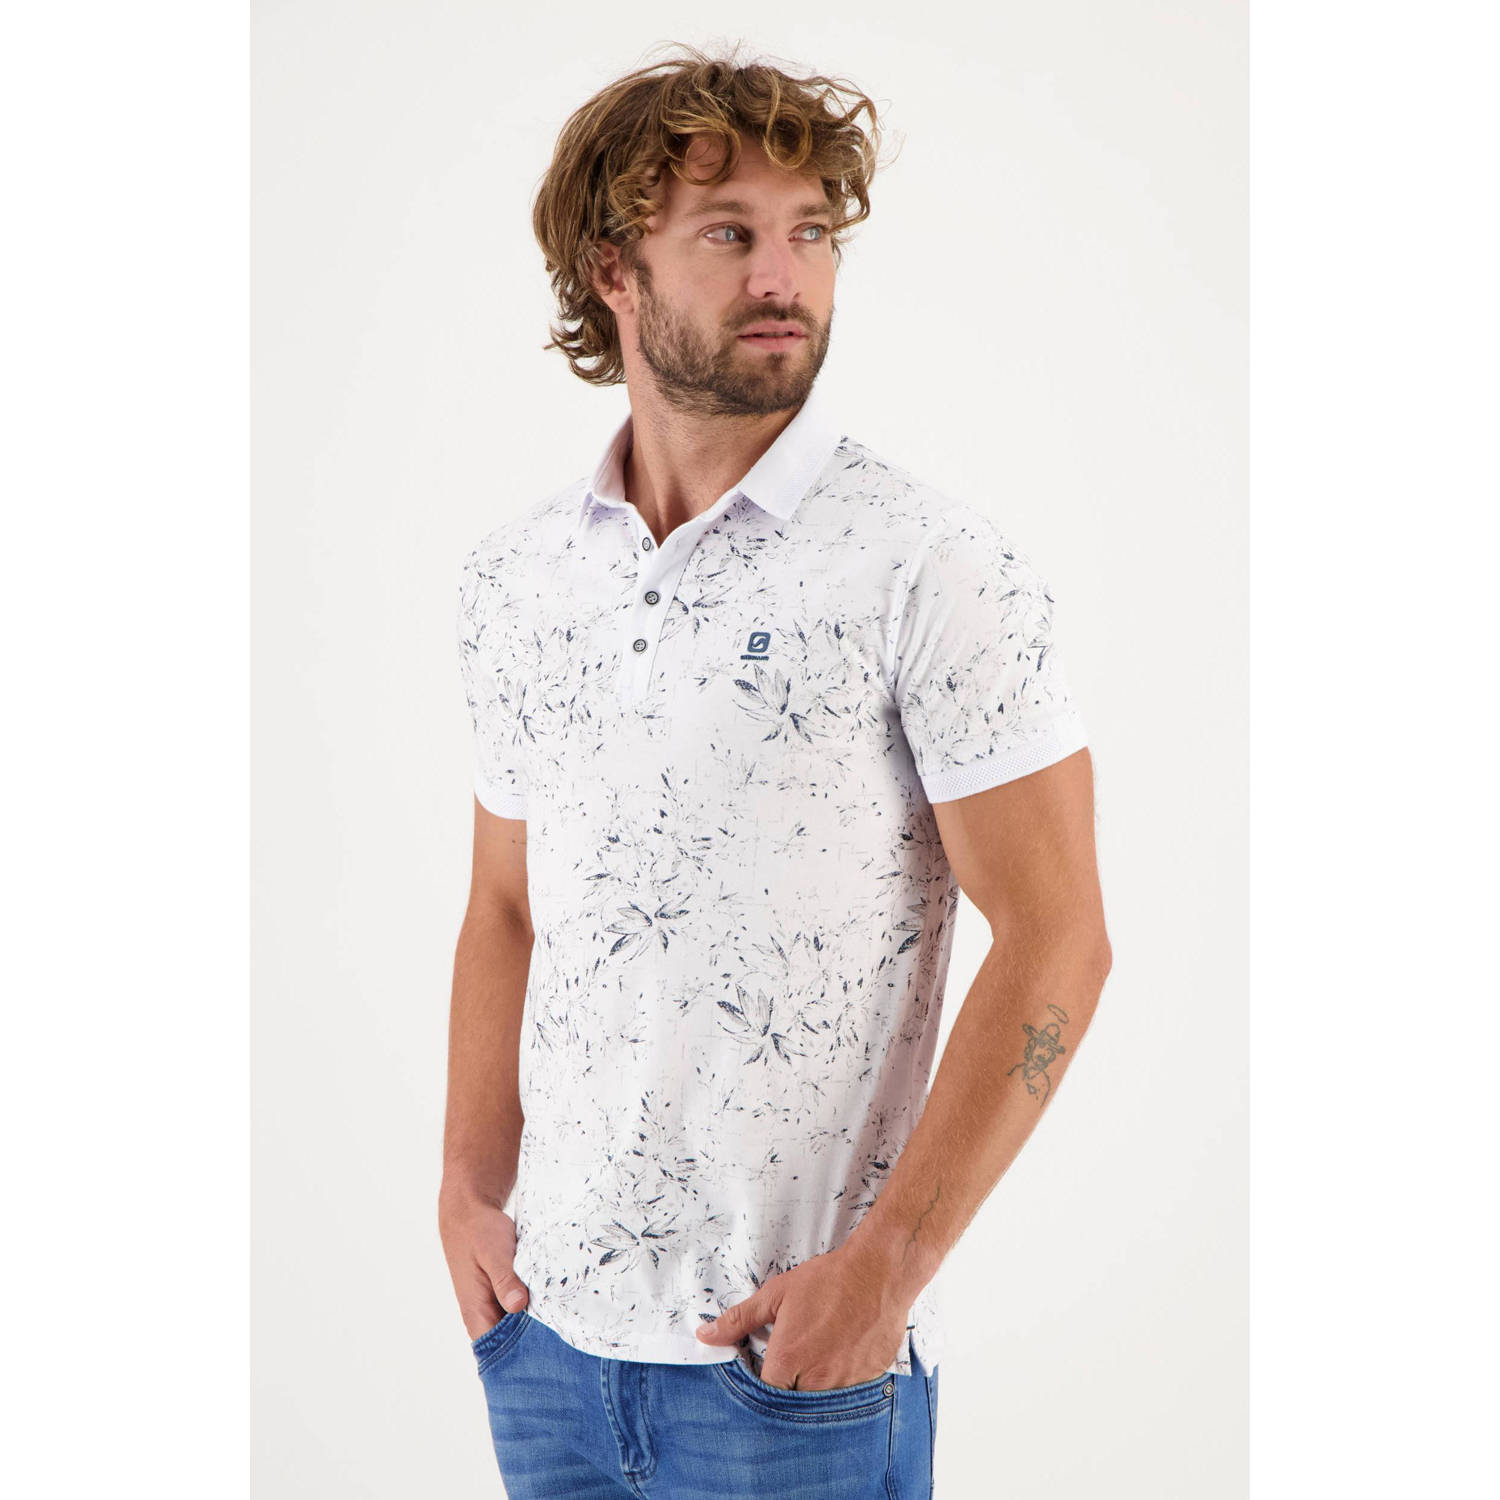 GABBIANO polo met all over print white